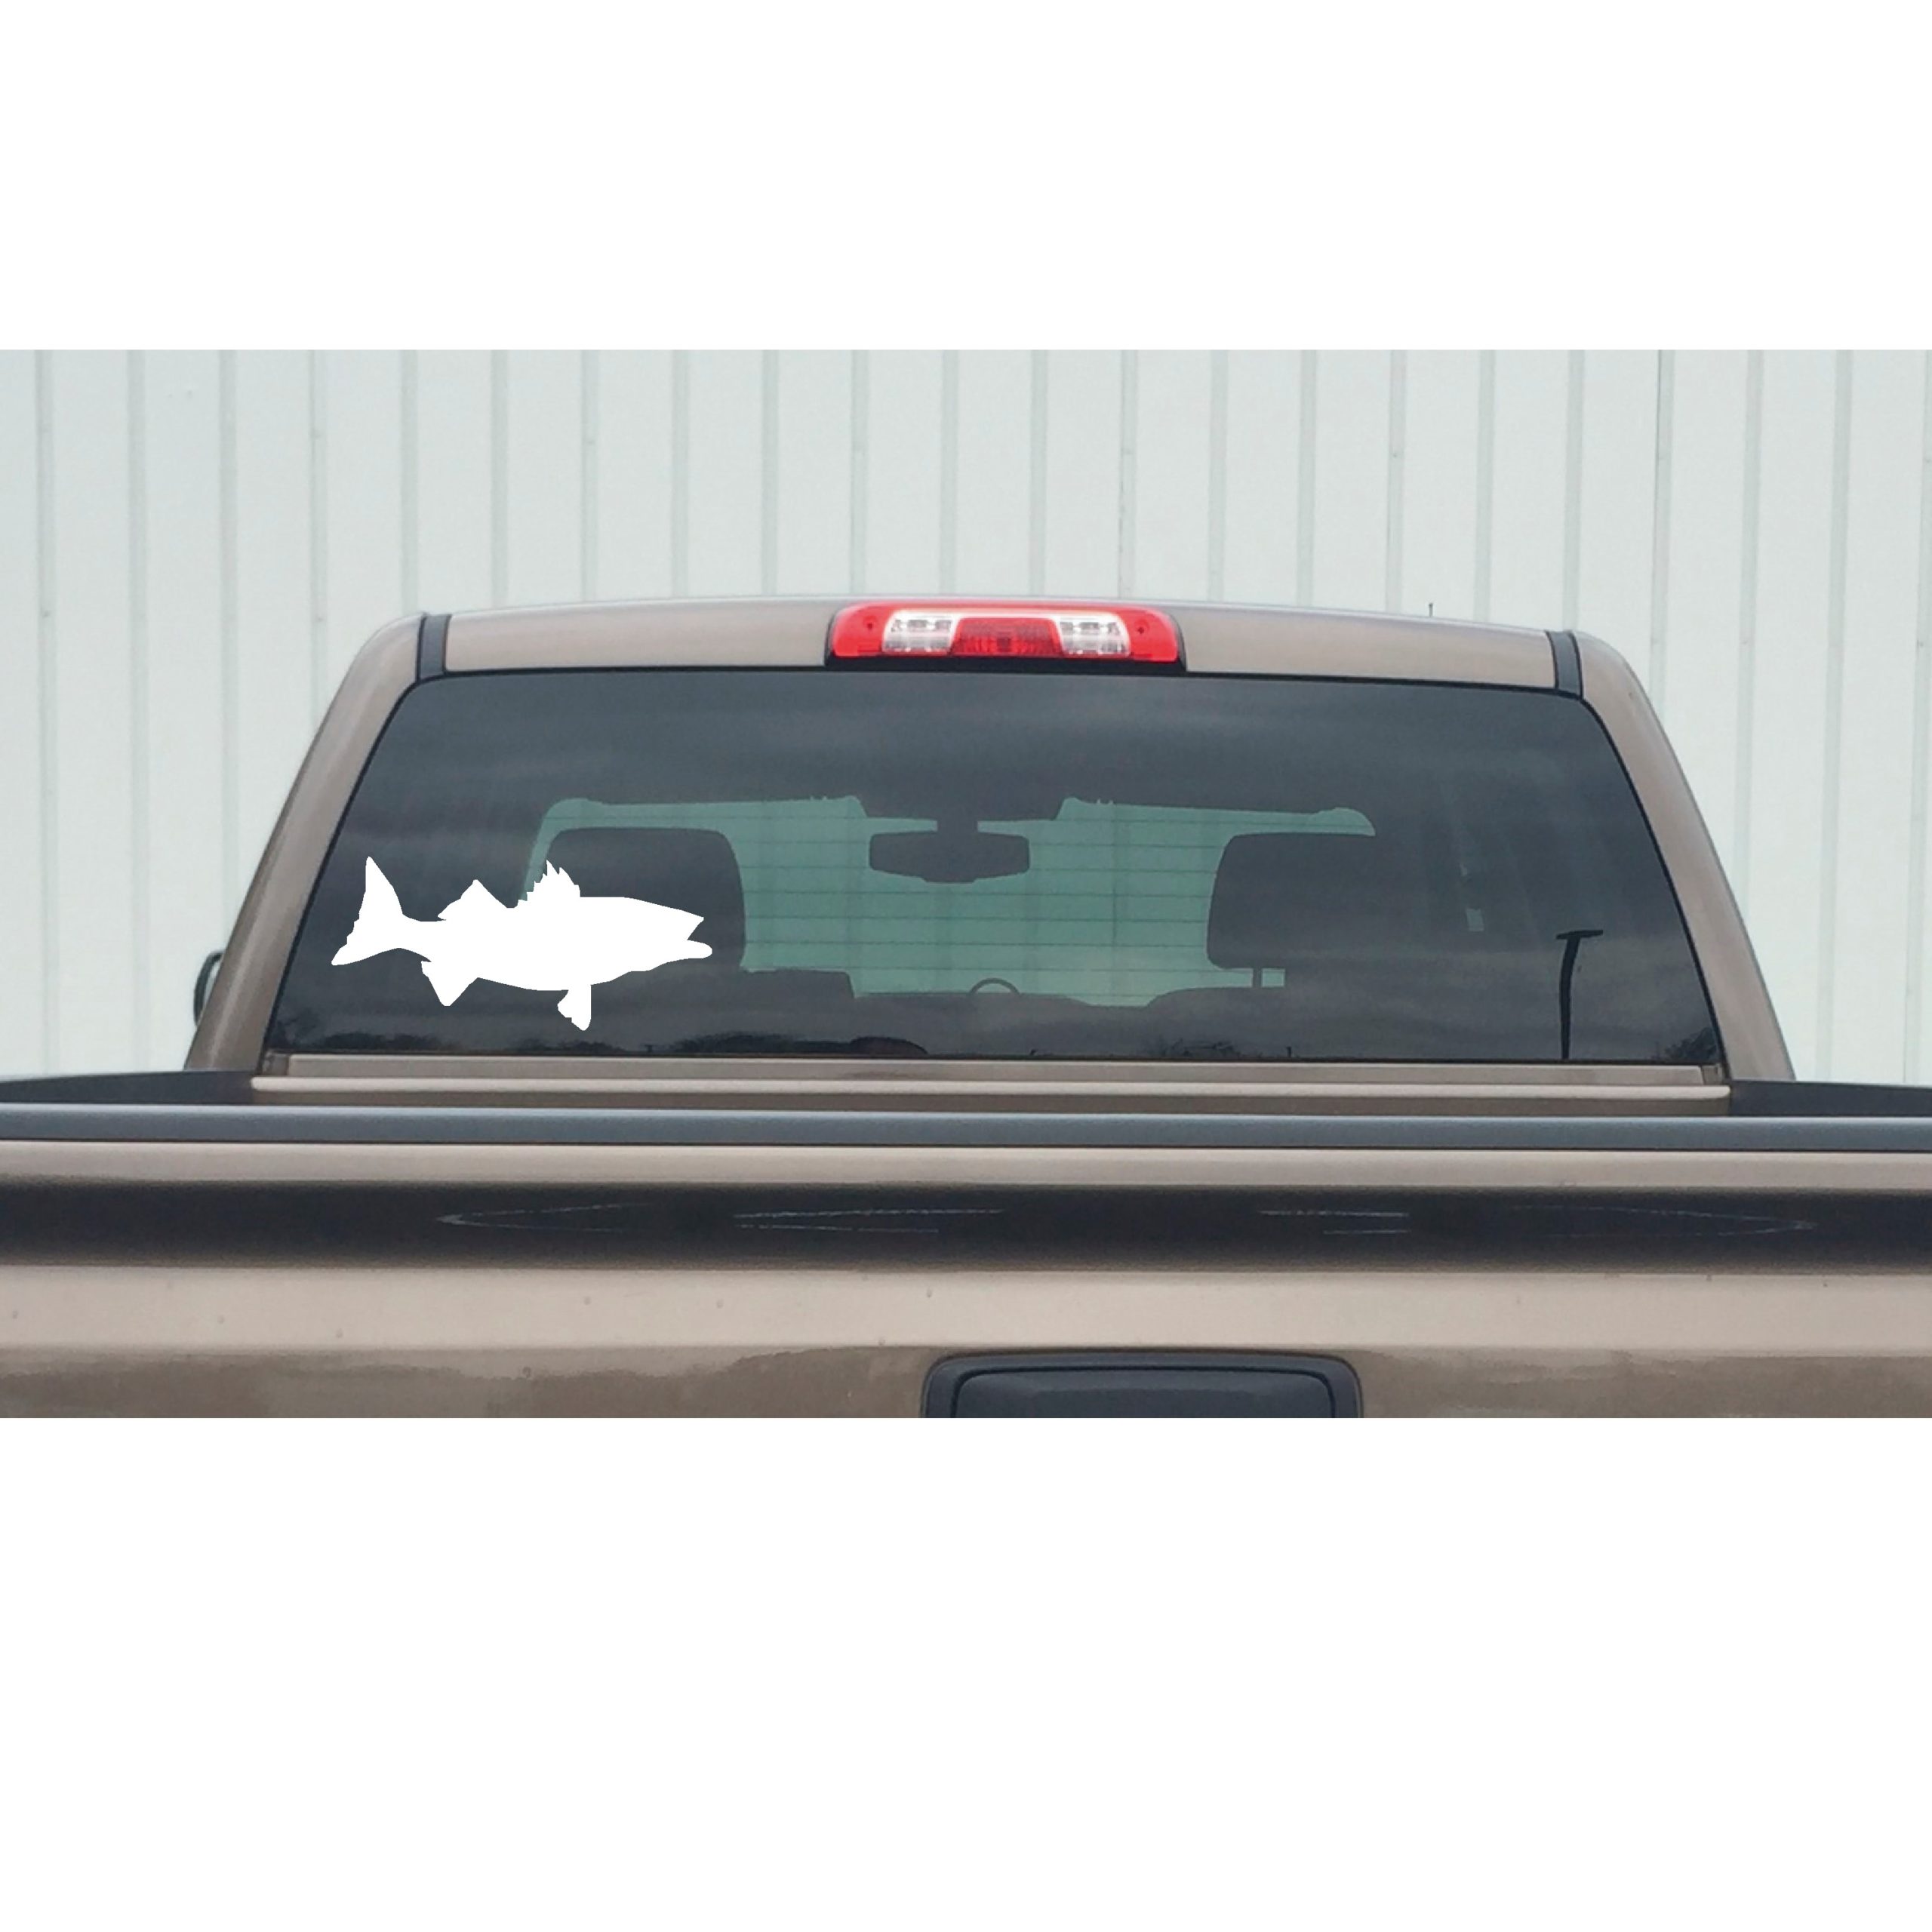 Bow Fishing Design Decals & Window Stickers